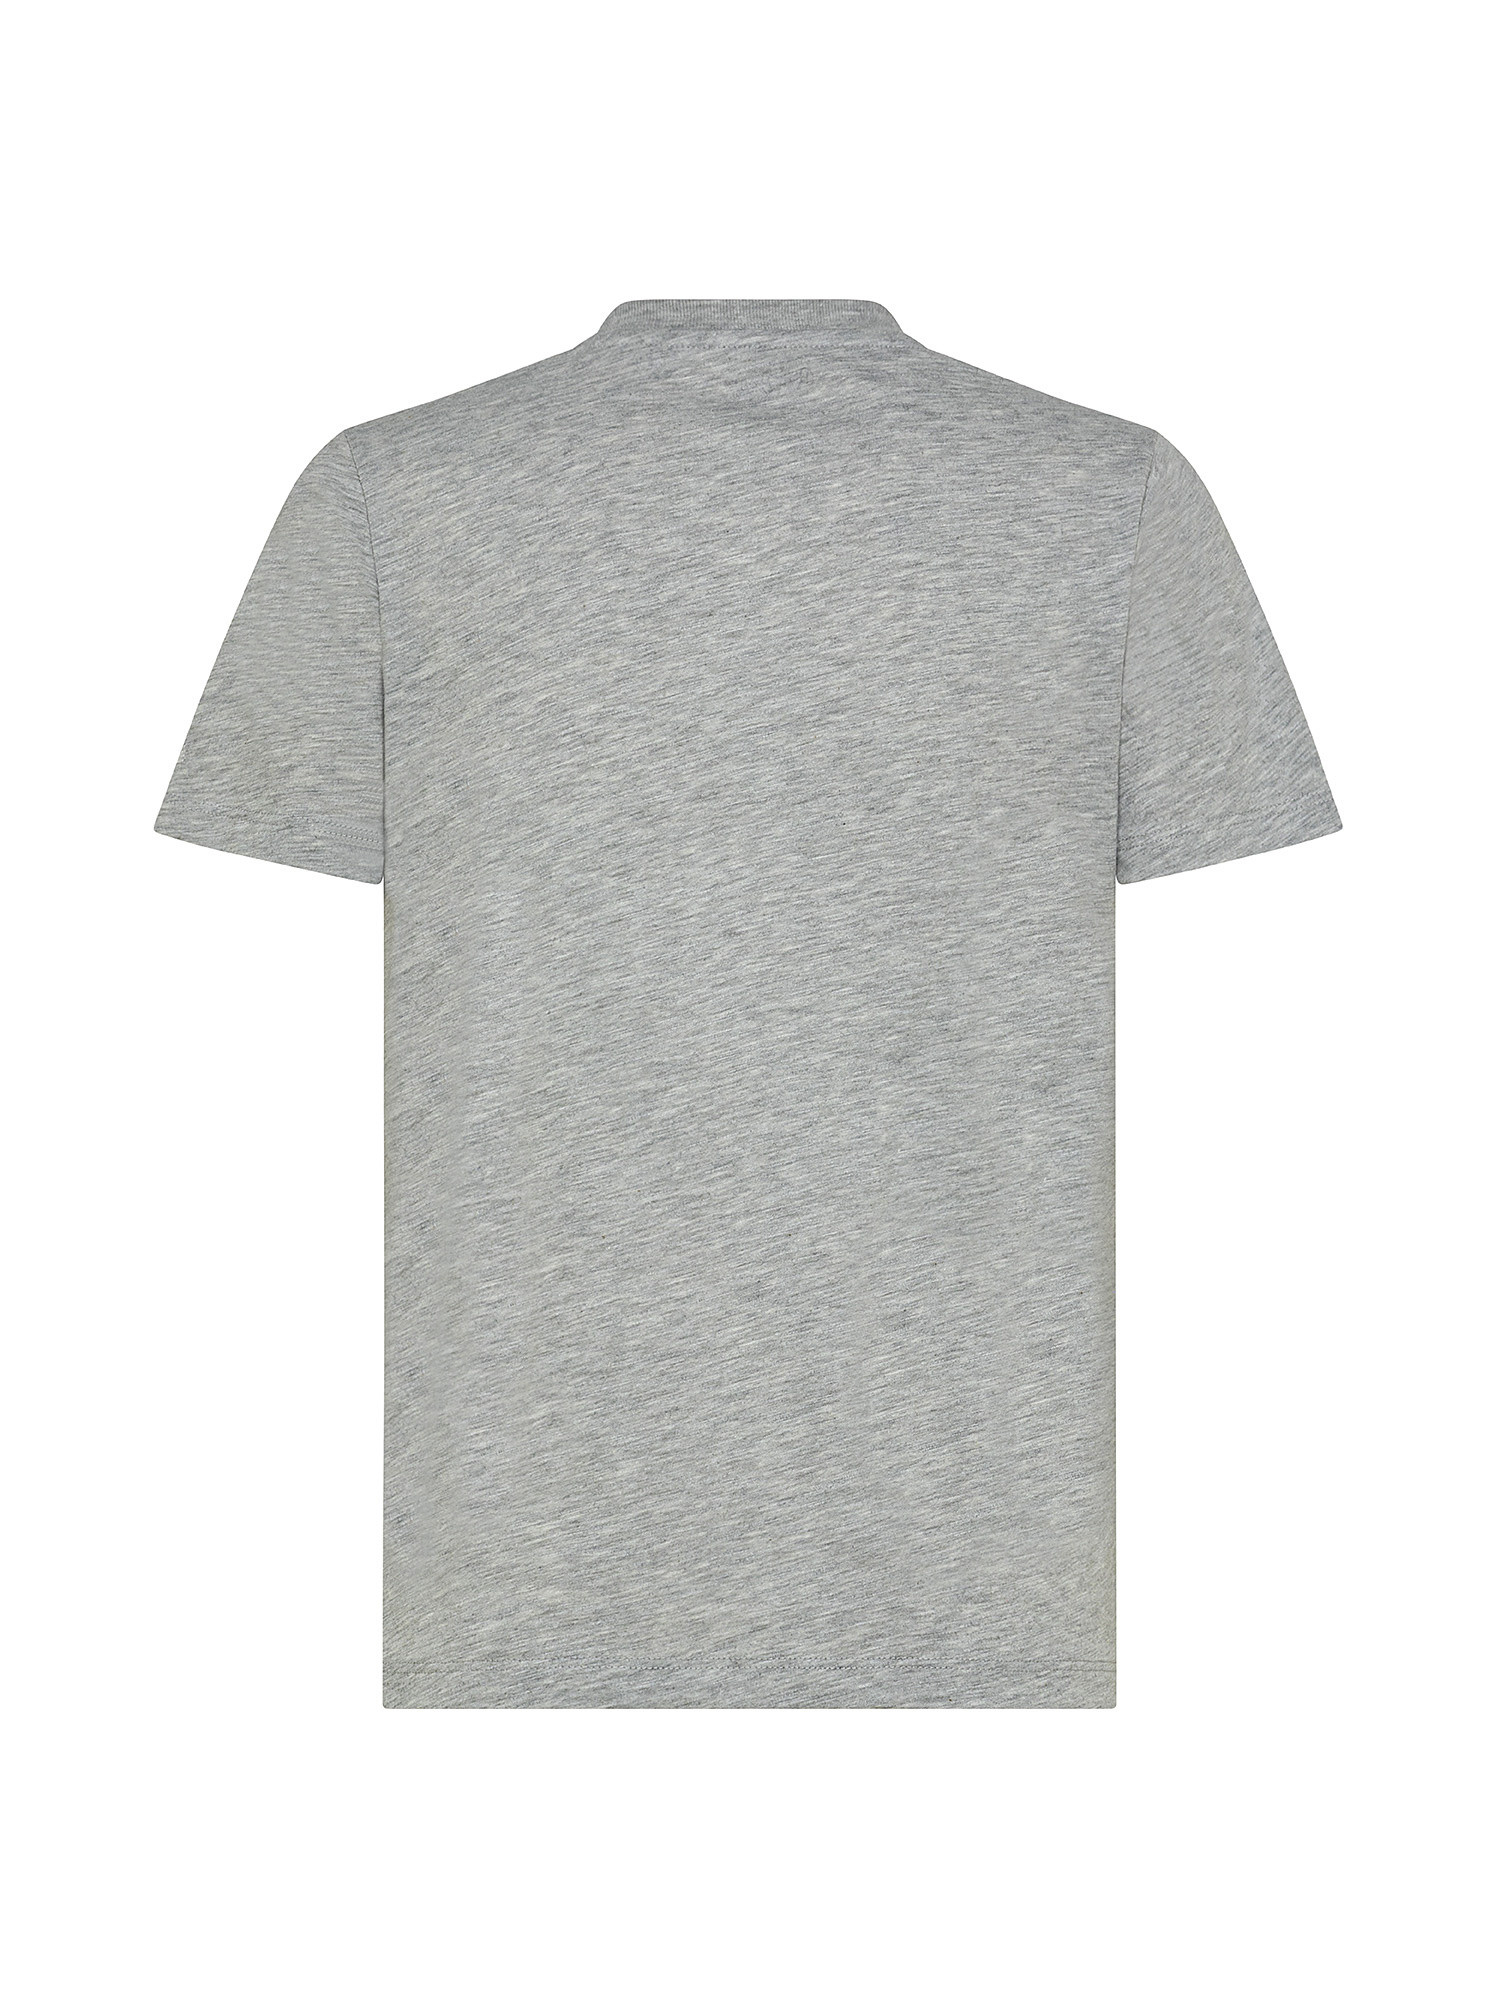 T-shirt Rosemery con stampa logo, Grigio, large image number 1